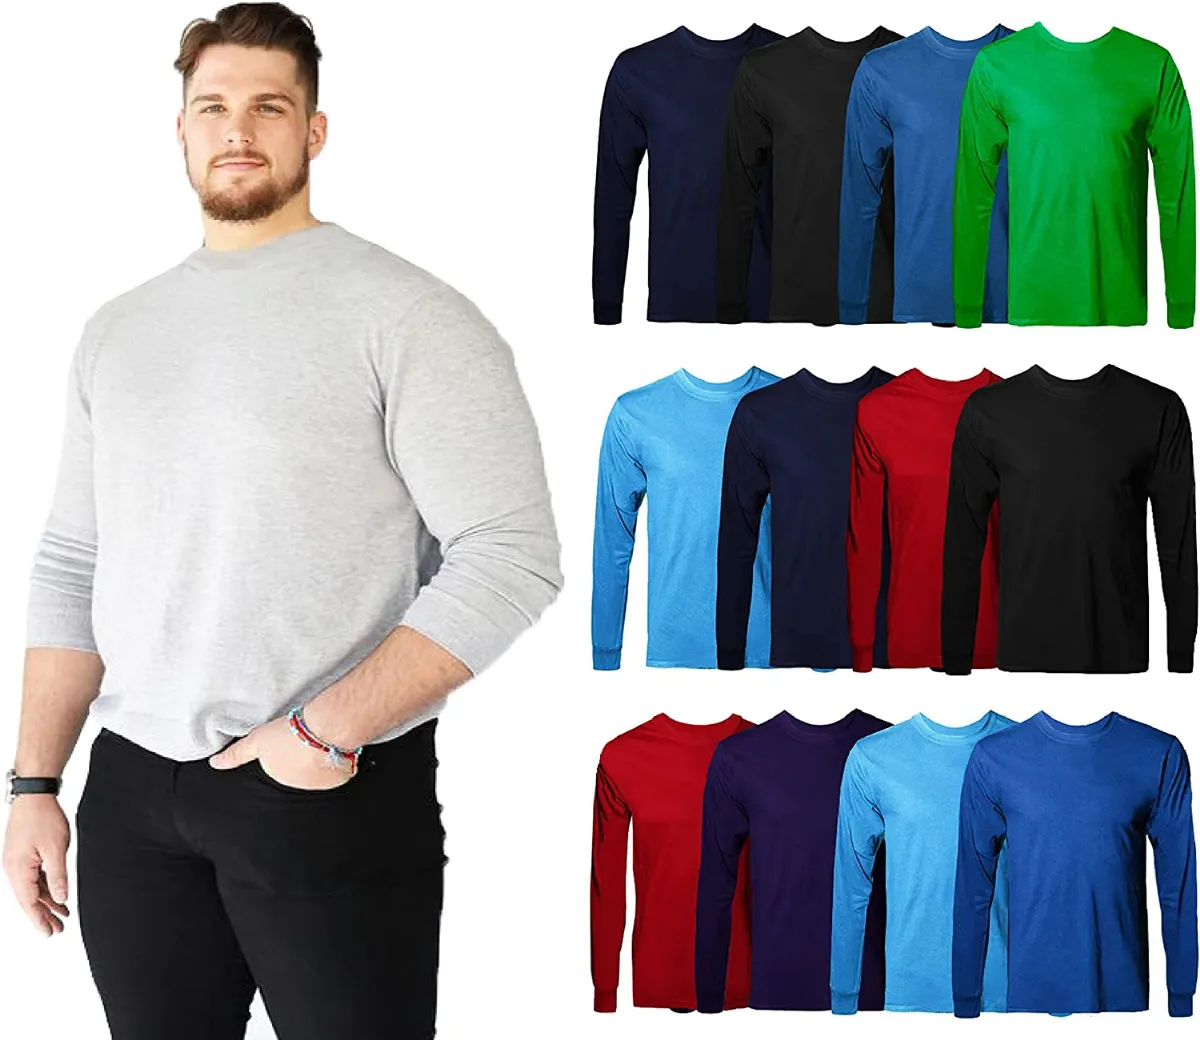 12 Pieces of Mens Cotton Long Sleeve Tee Shirt Assorted Colors Size 5x Large